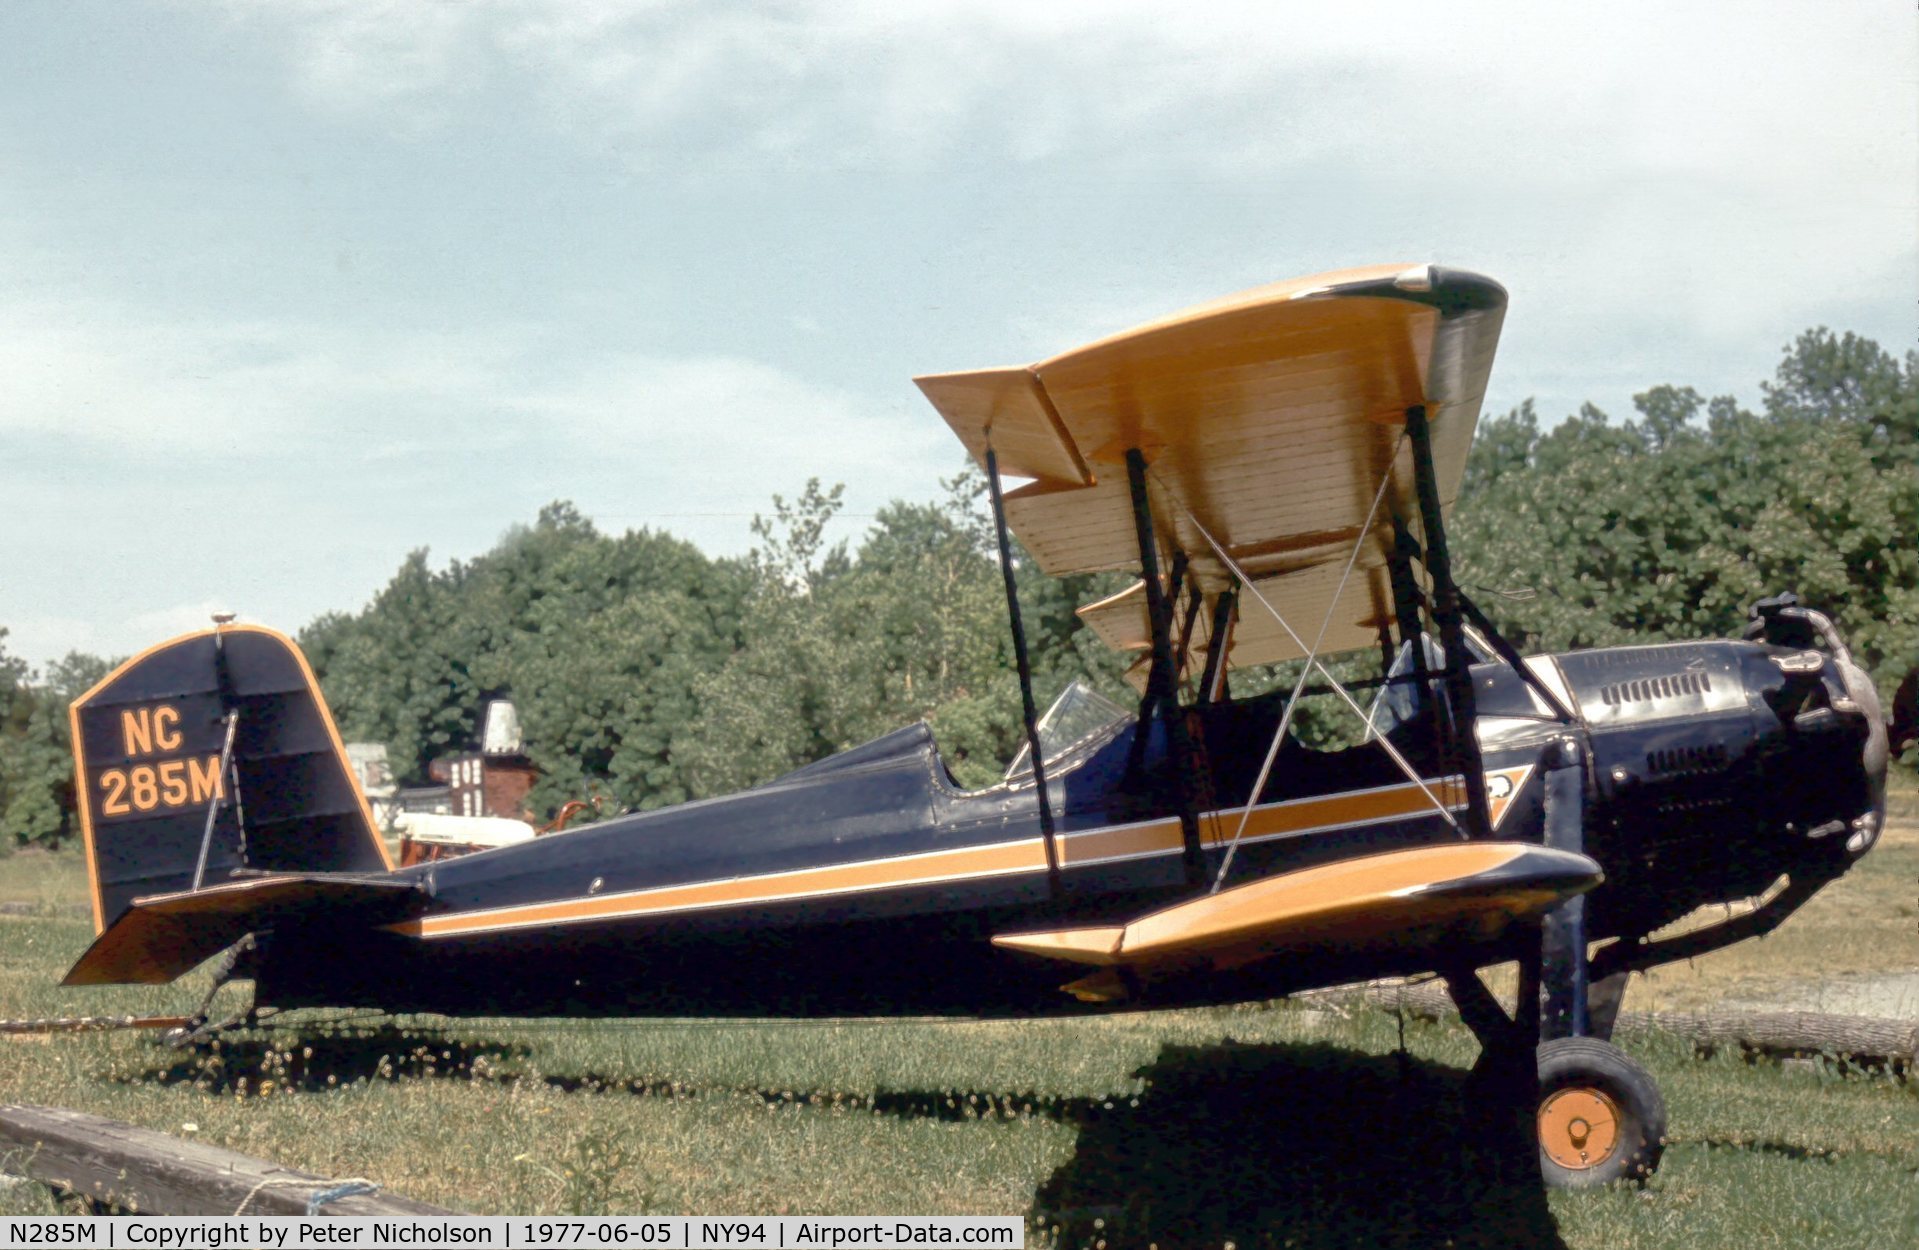 N285M, 1929 Spartan C3-165 C/N 120, The Rhinebeck Collection Spartan as NC285M in the Summer of 1977.